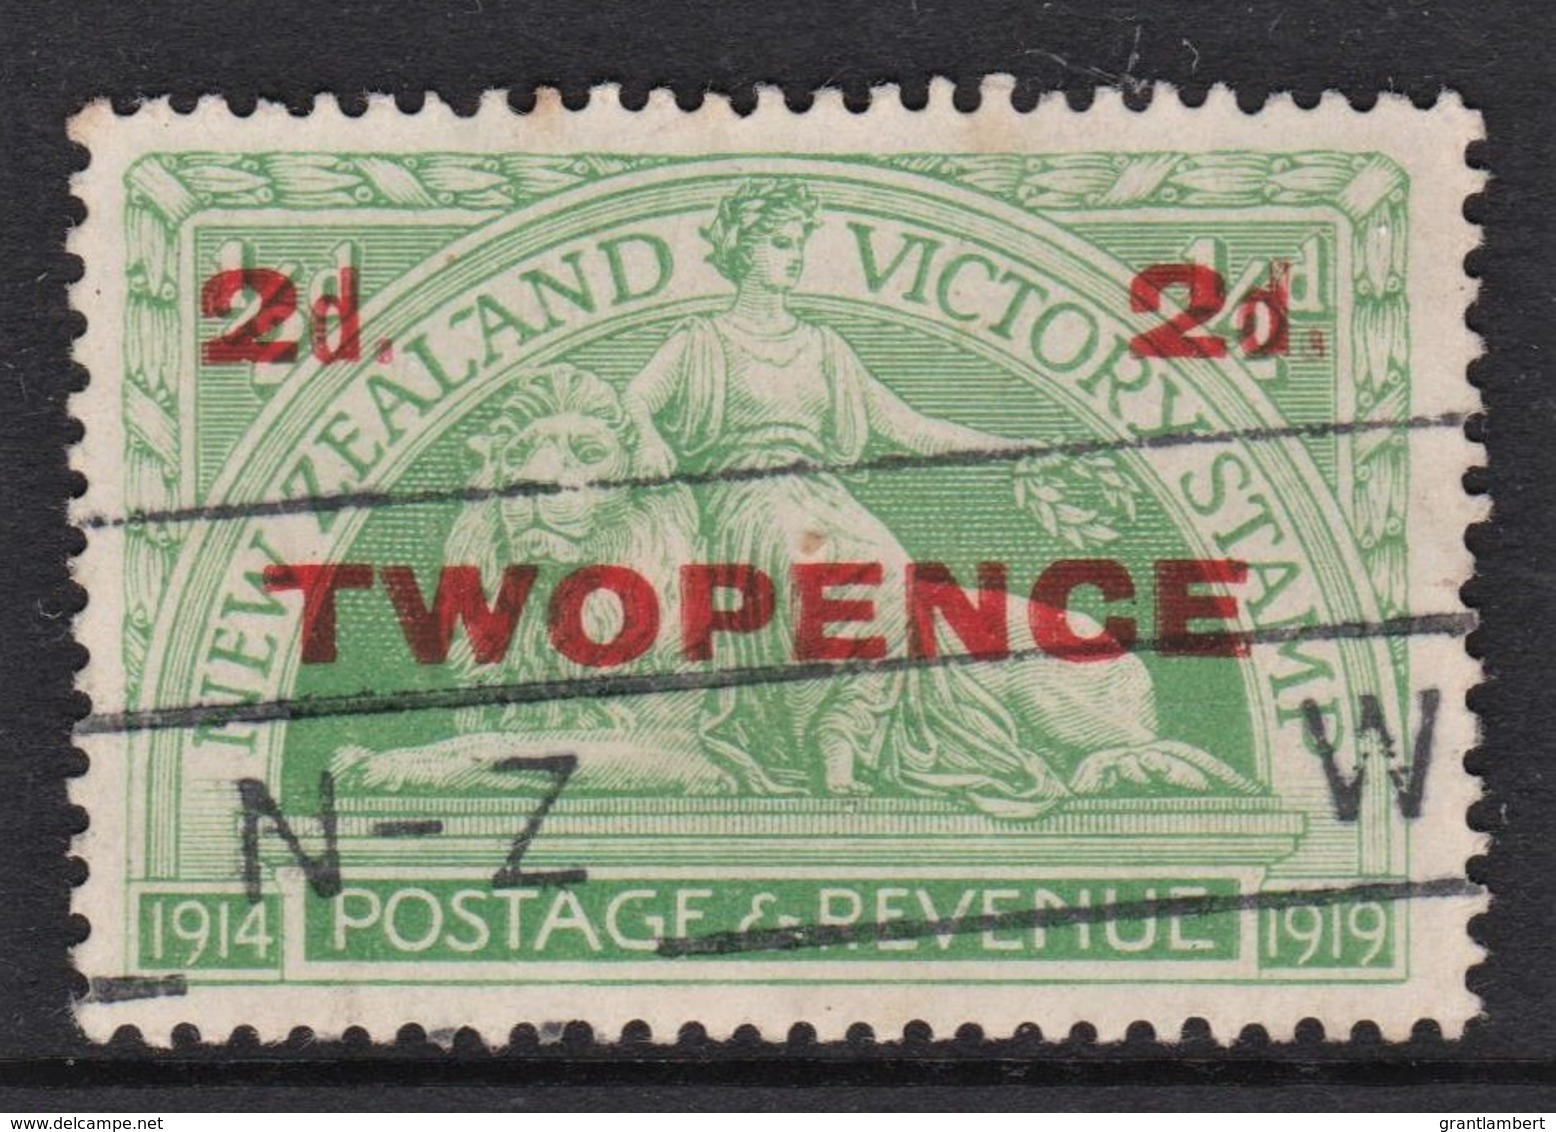 New Zealand 1922 Victory TWO PENCE Overprint Used  SG 459 - Oblitérés